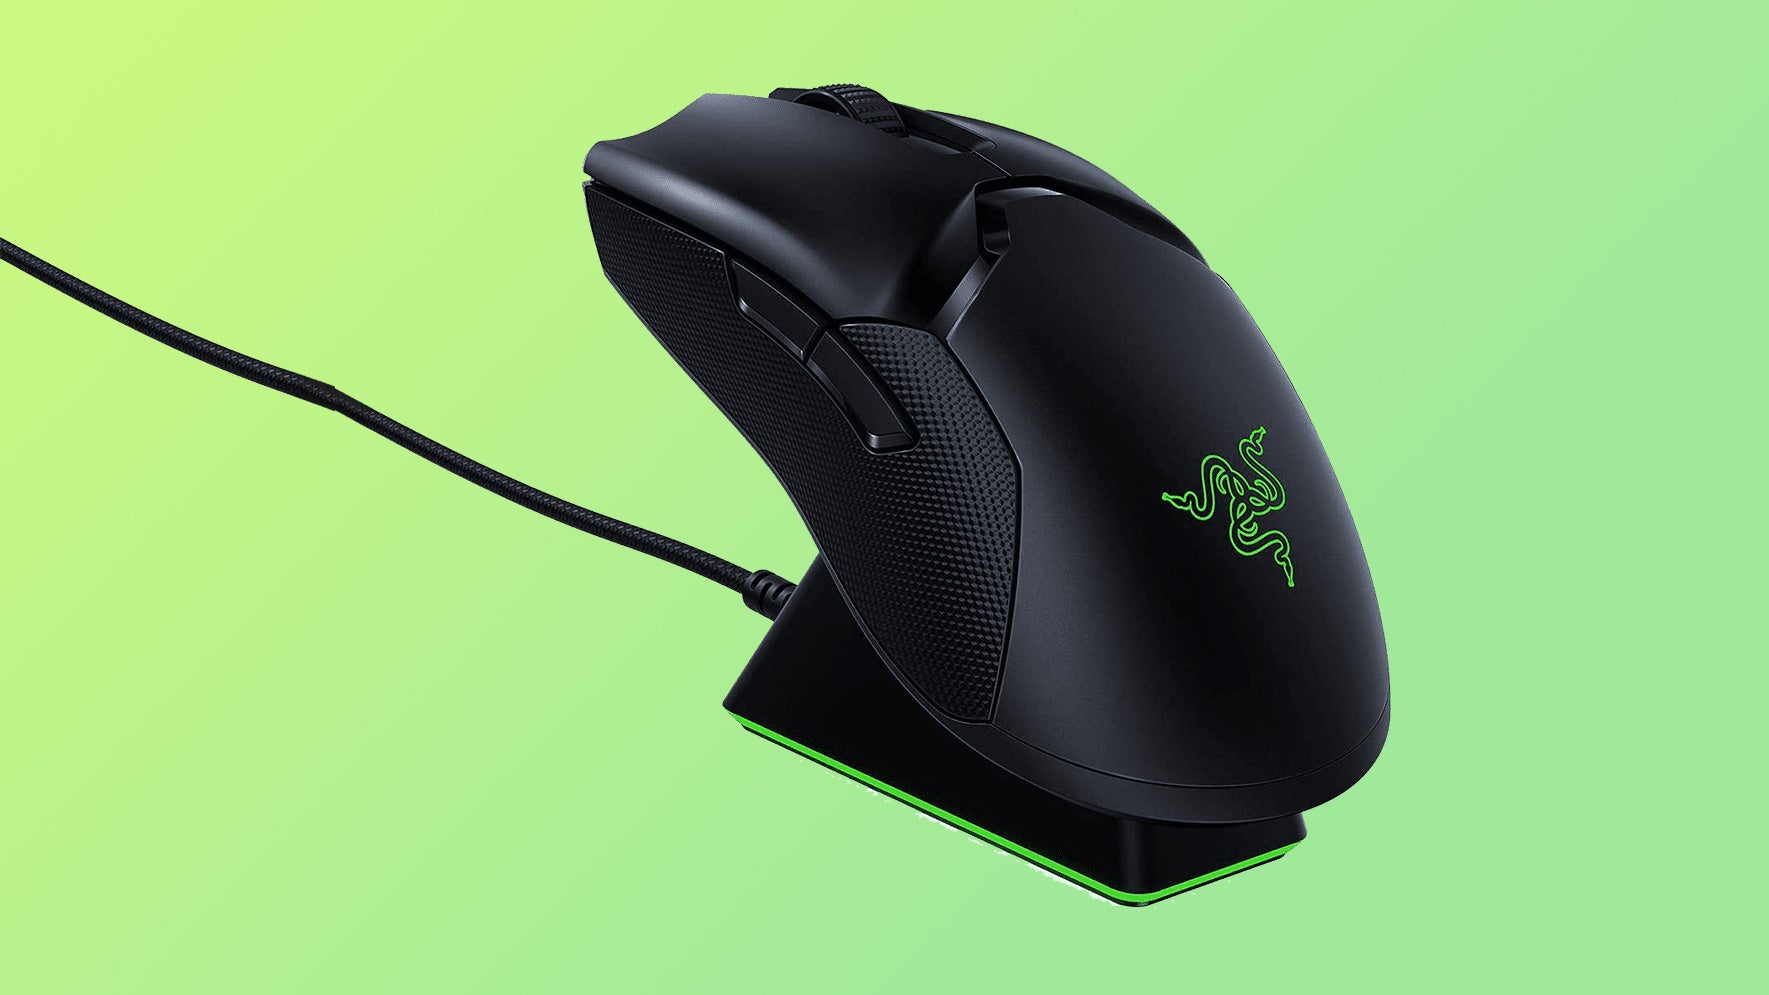 The Razer Viper Ultimate is down to $60 with its fancy charging 